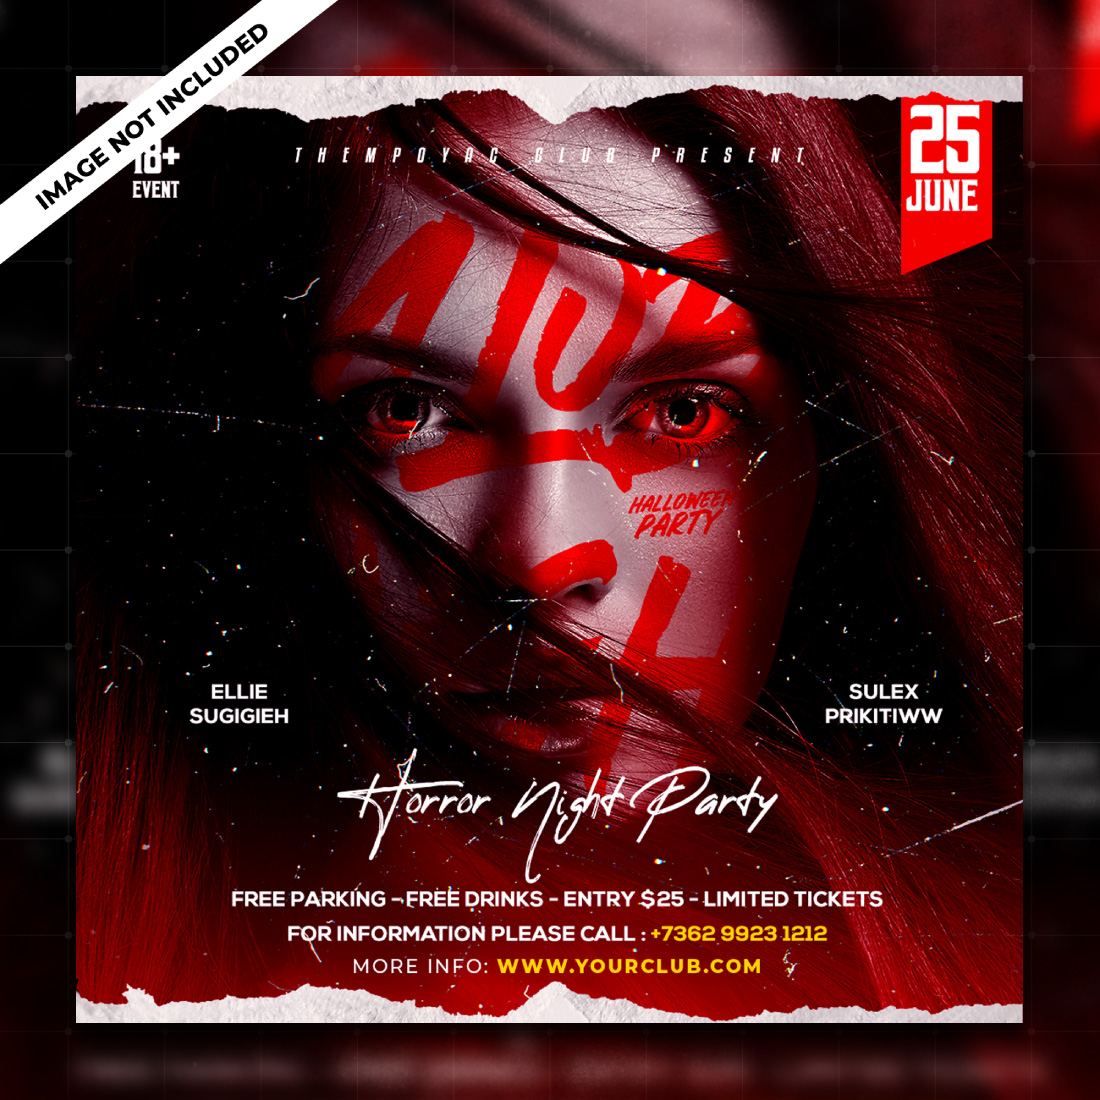 9 Music Party Flyer Template, your music flyer pre-made design.